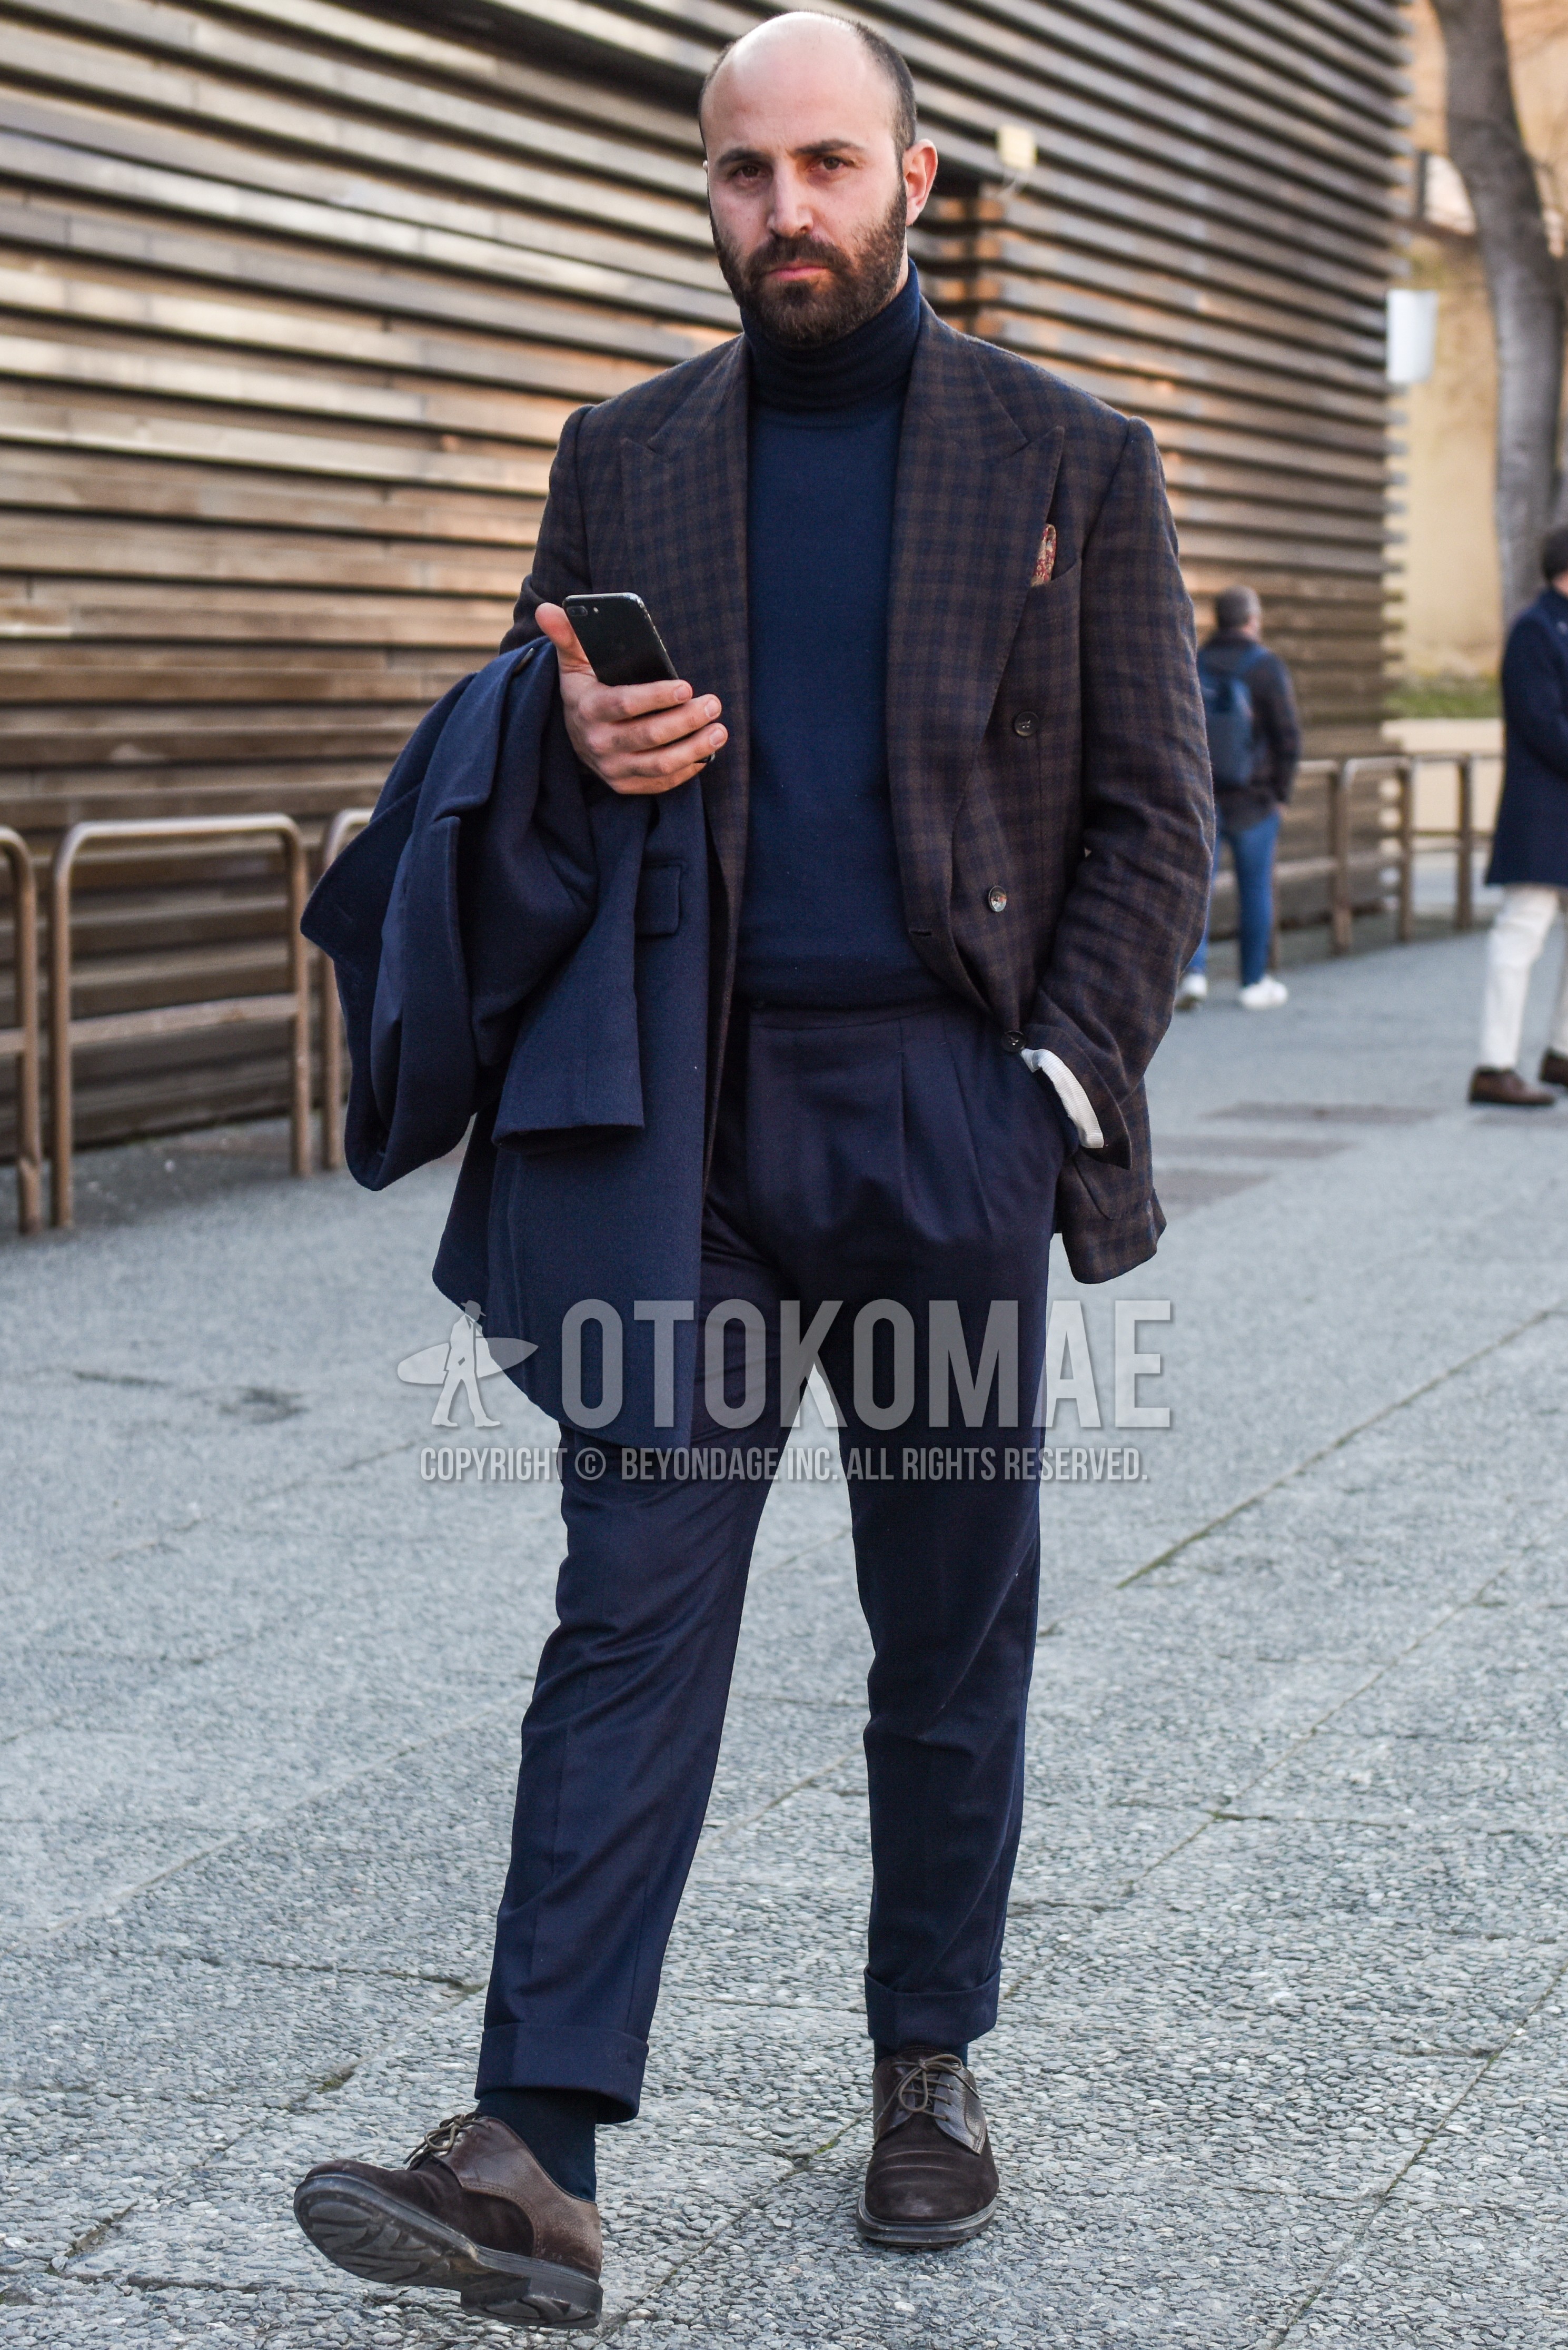 Men's spring autumn outfit with brown check tailored jacket, navy plain turtleneck knit, navy plain slacks, navy plain pleated pants, navy plain beltless pants, navy plain socks, brown plain toe leather shoes.